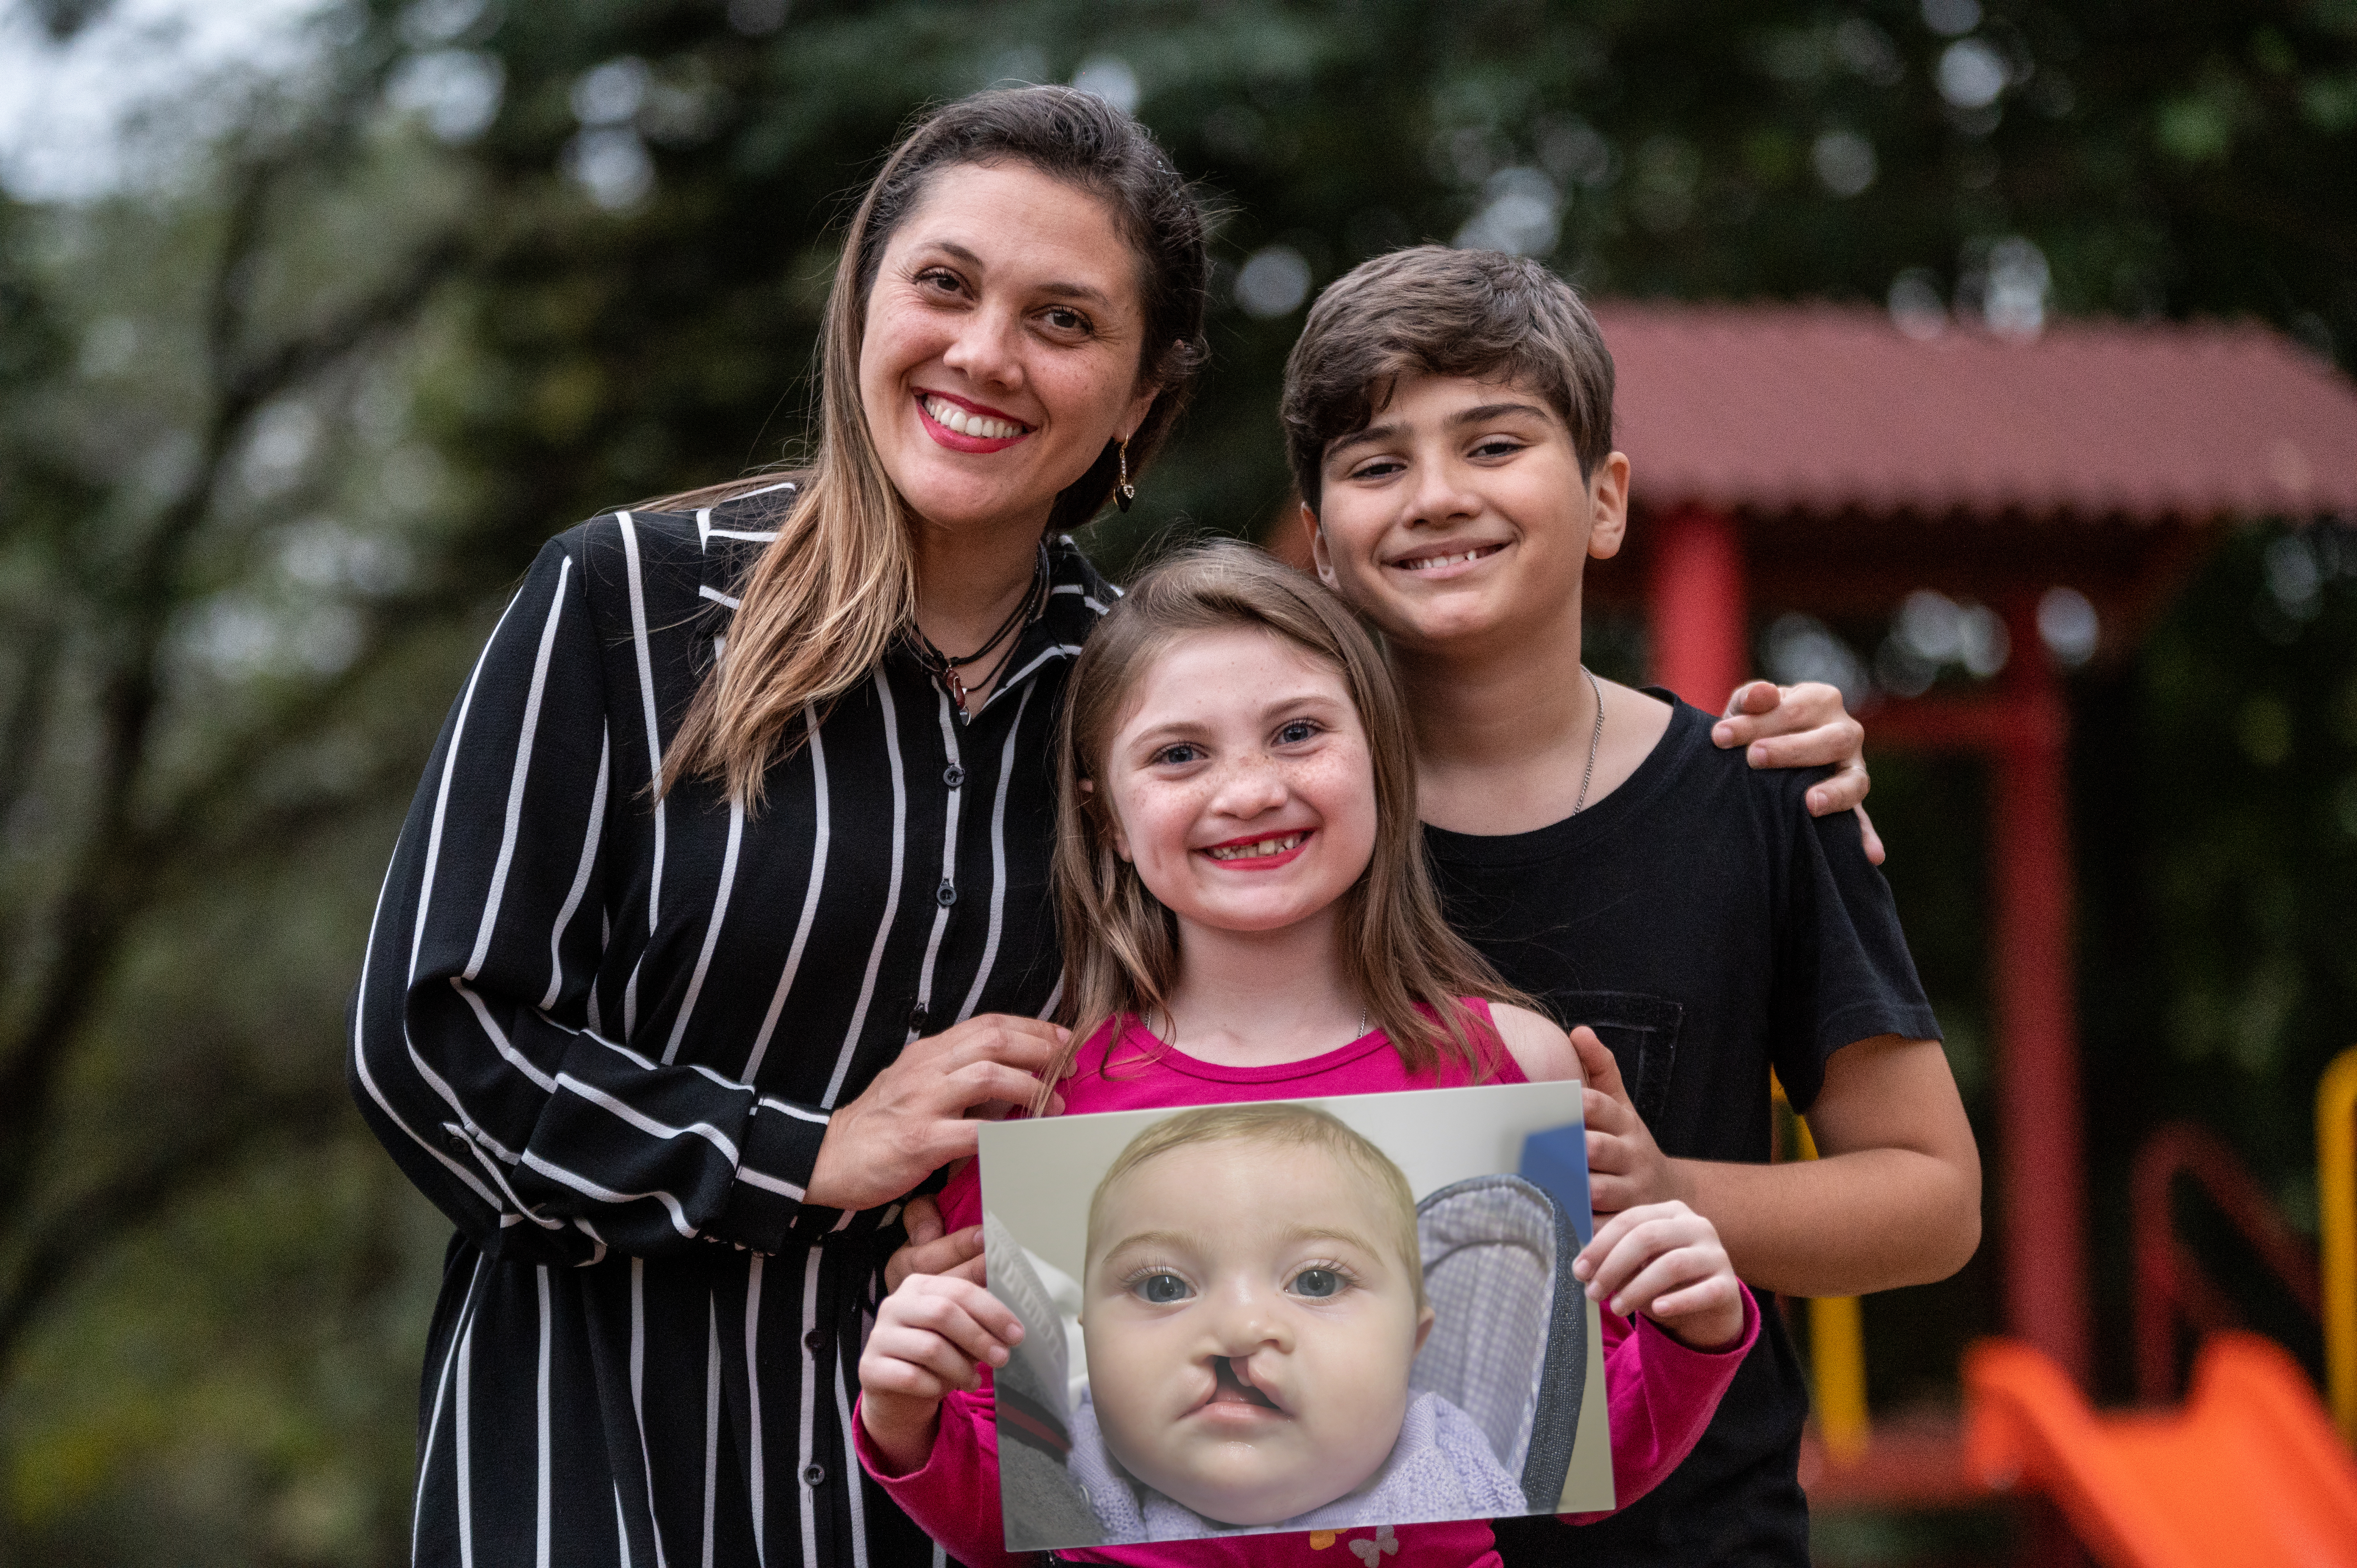 Grazi and Nilo standing behind Milena with their hands on her shoulders. Milena is holding a photo of herself as a baby before cleft surgery